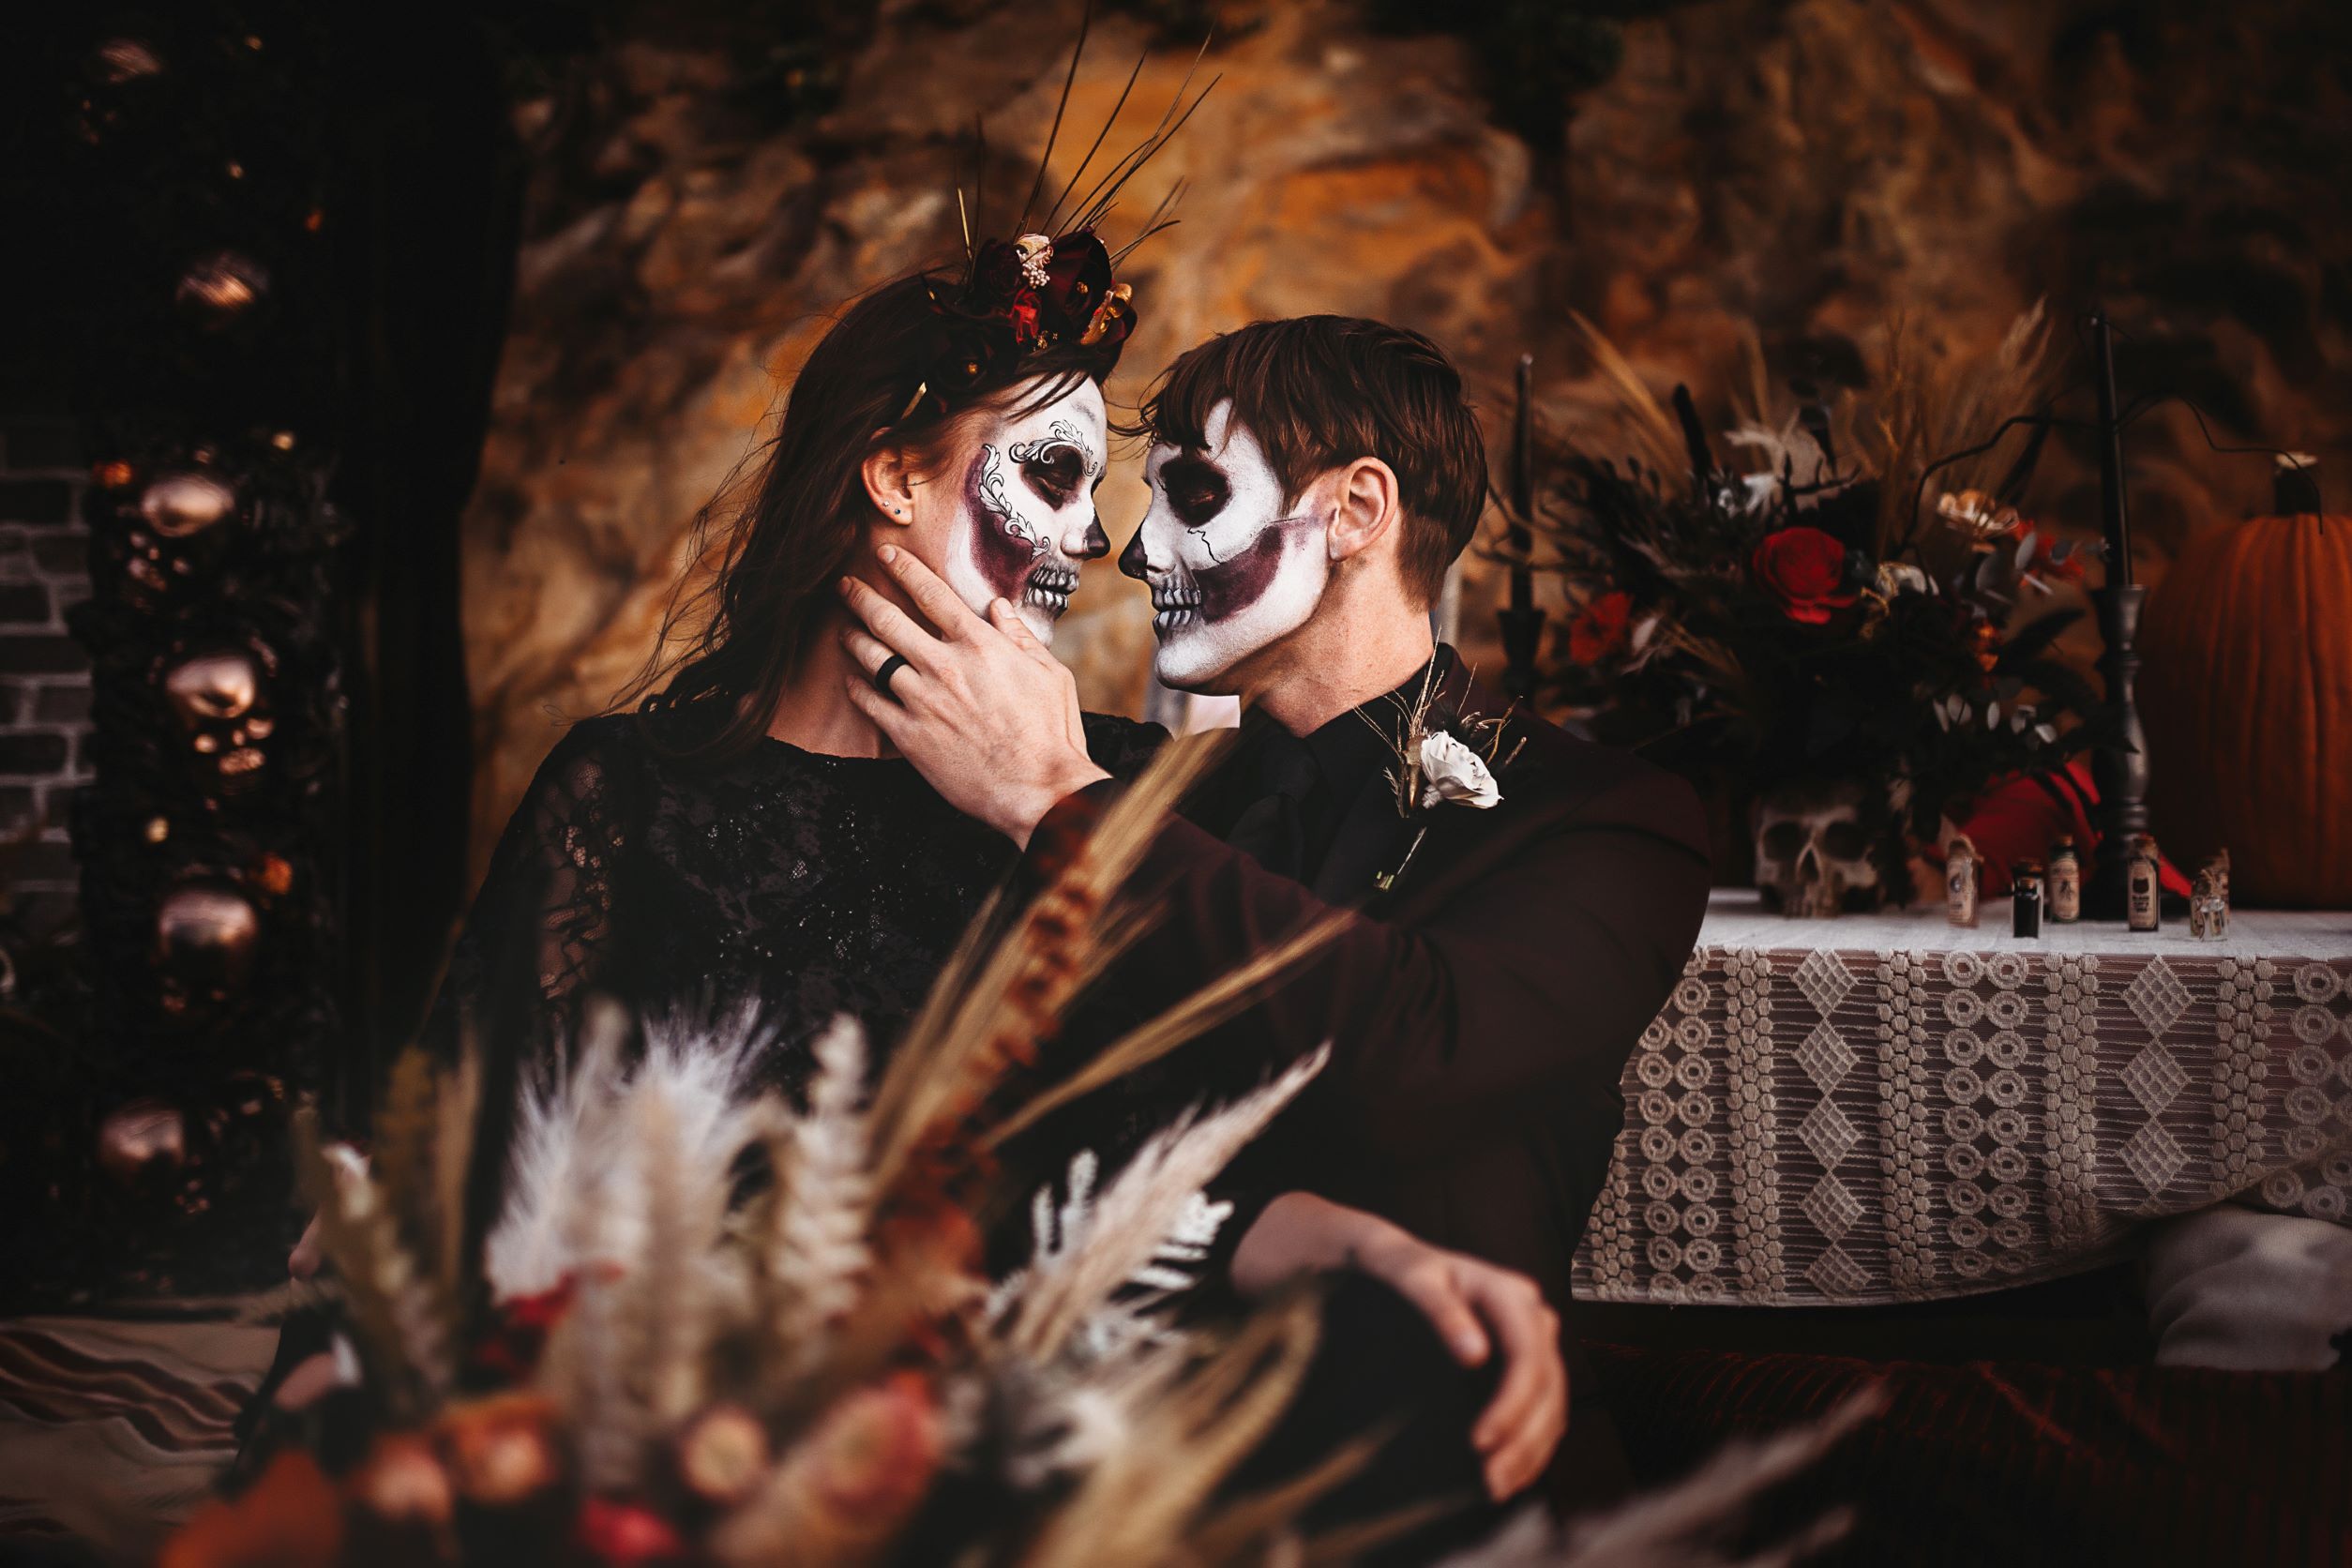 bride and groom looking at each other, Halloween theme, faces are painted like skeletons